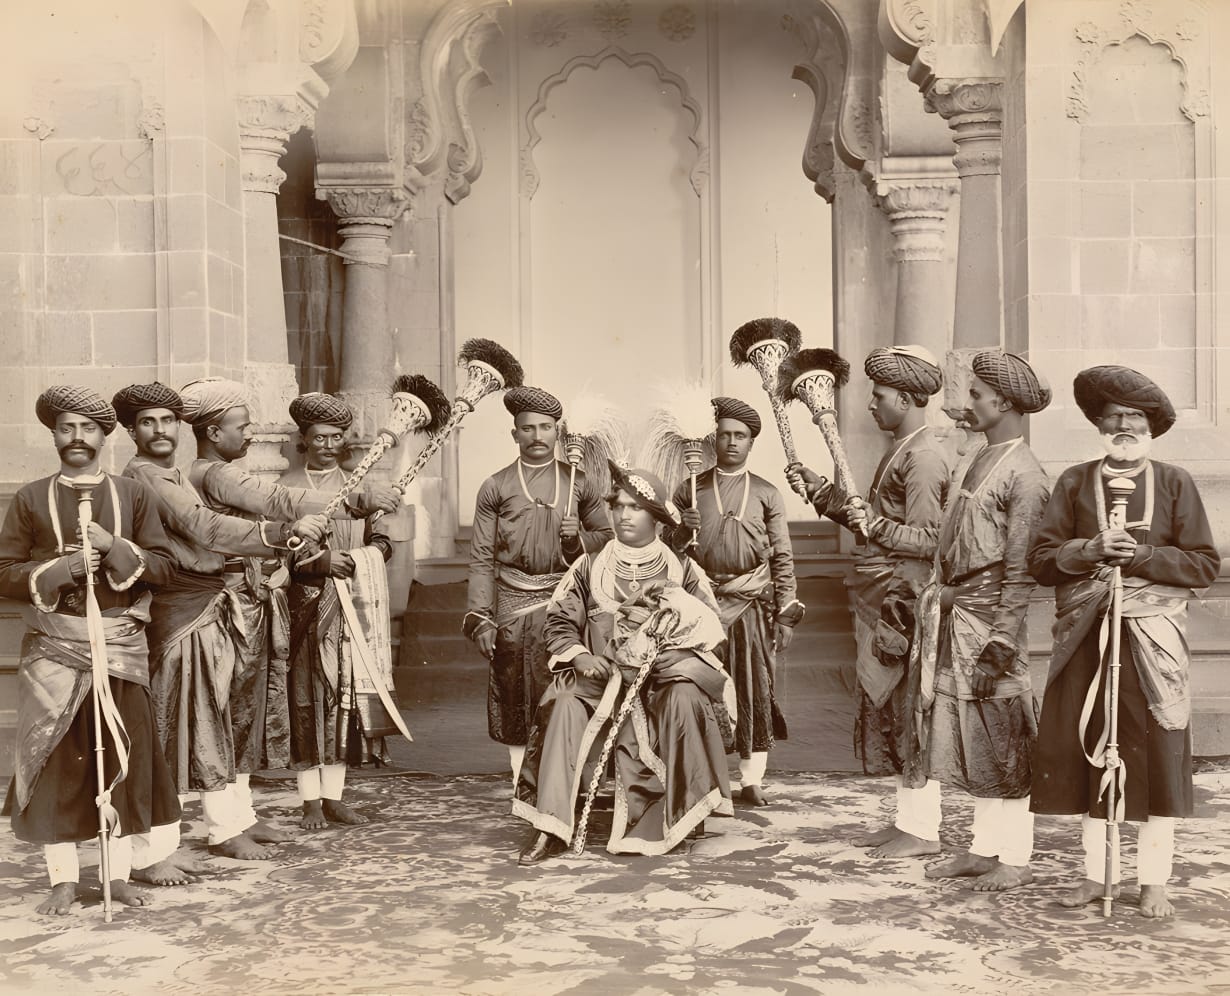 Picture of Shahu Maharaj Sitting in Royal Attire Outside the Palace with his Servant Staff